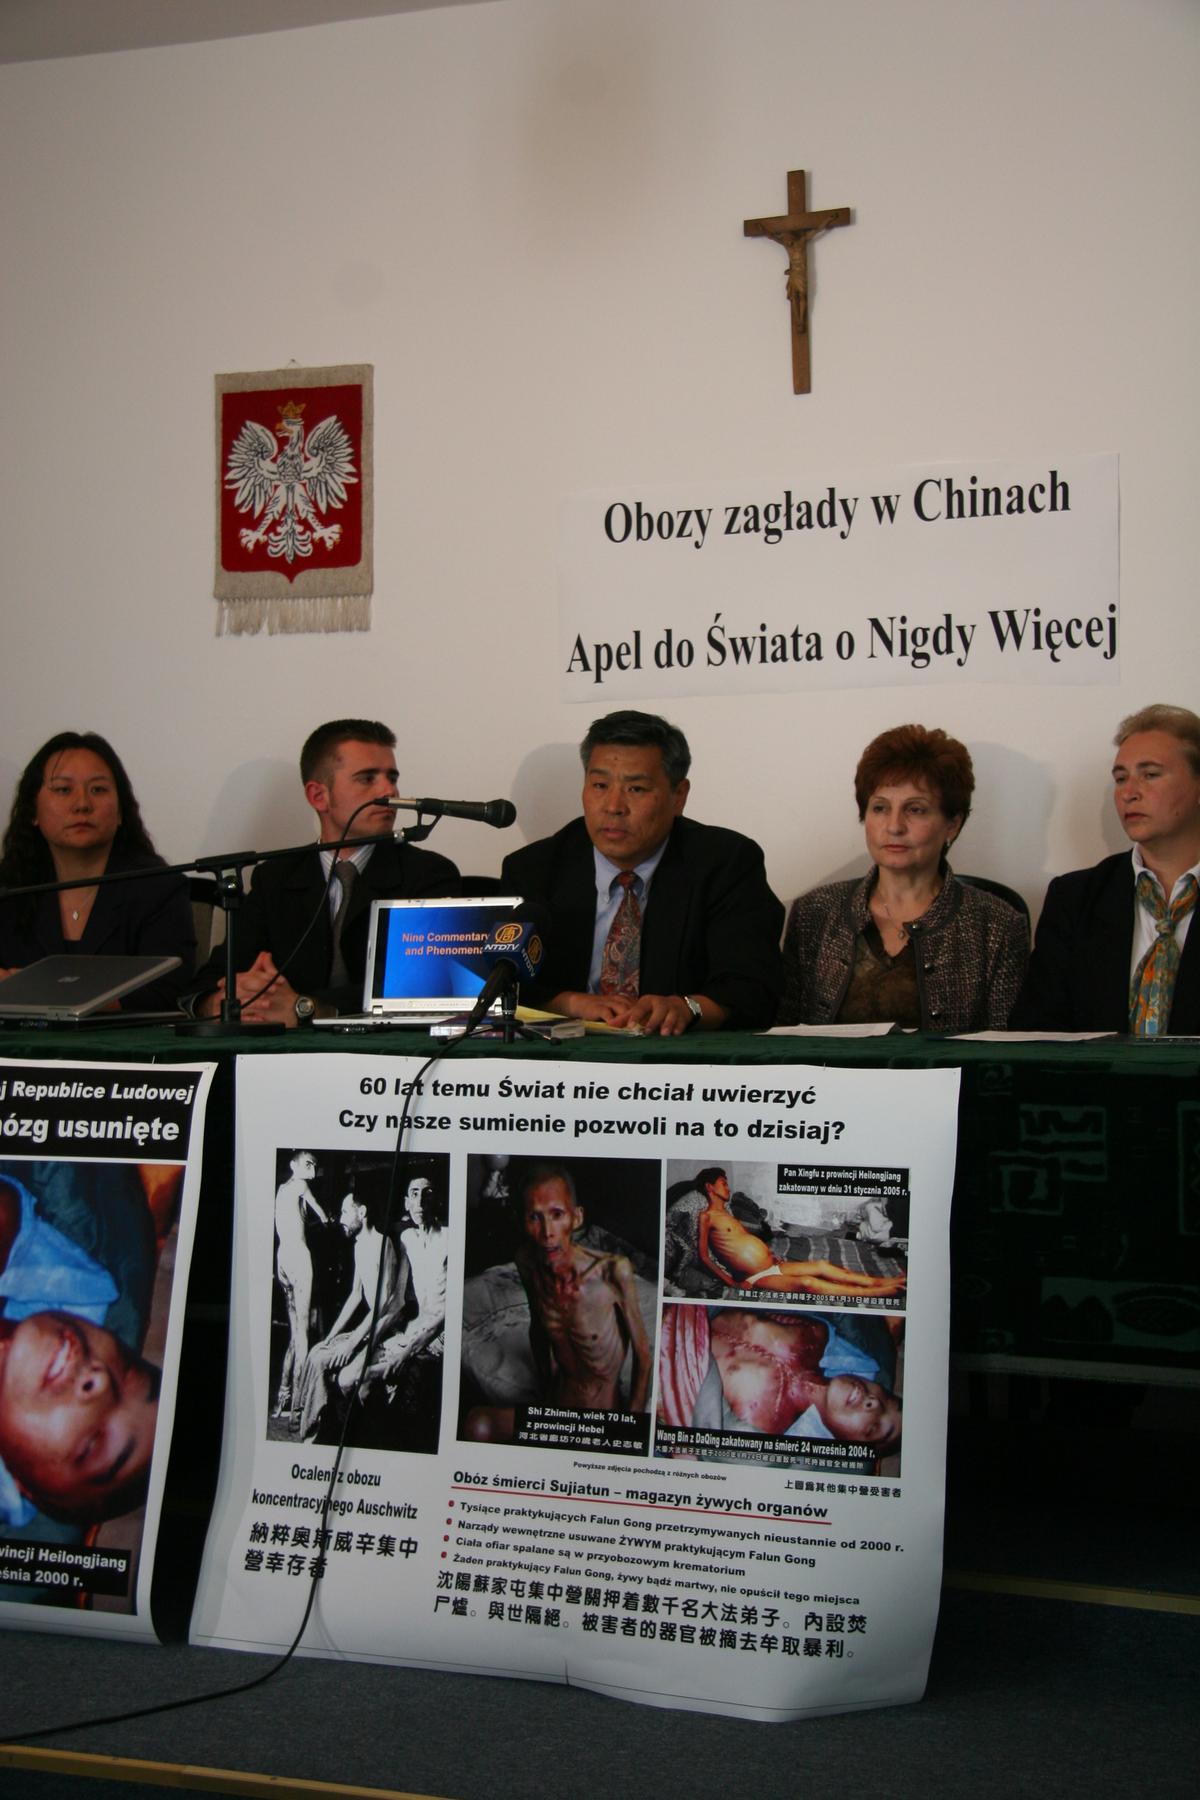 AUSCHWITZ: Professor Sen Nieh, surrounded by three panelists and panel moderator, speaks at the "Never Again: Appeal to the World" forum discussing illegal organ harvesting in death camps in China, held in Auschwitz, Poland on May 9, 2006. (Jan Jekielek/The Epoch Times)